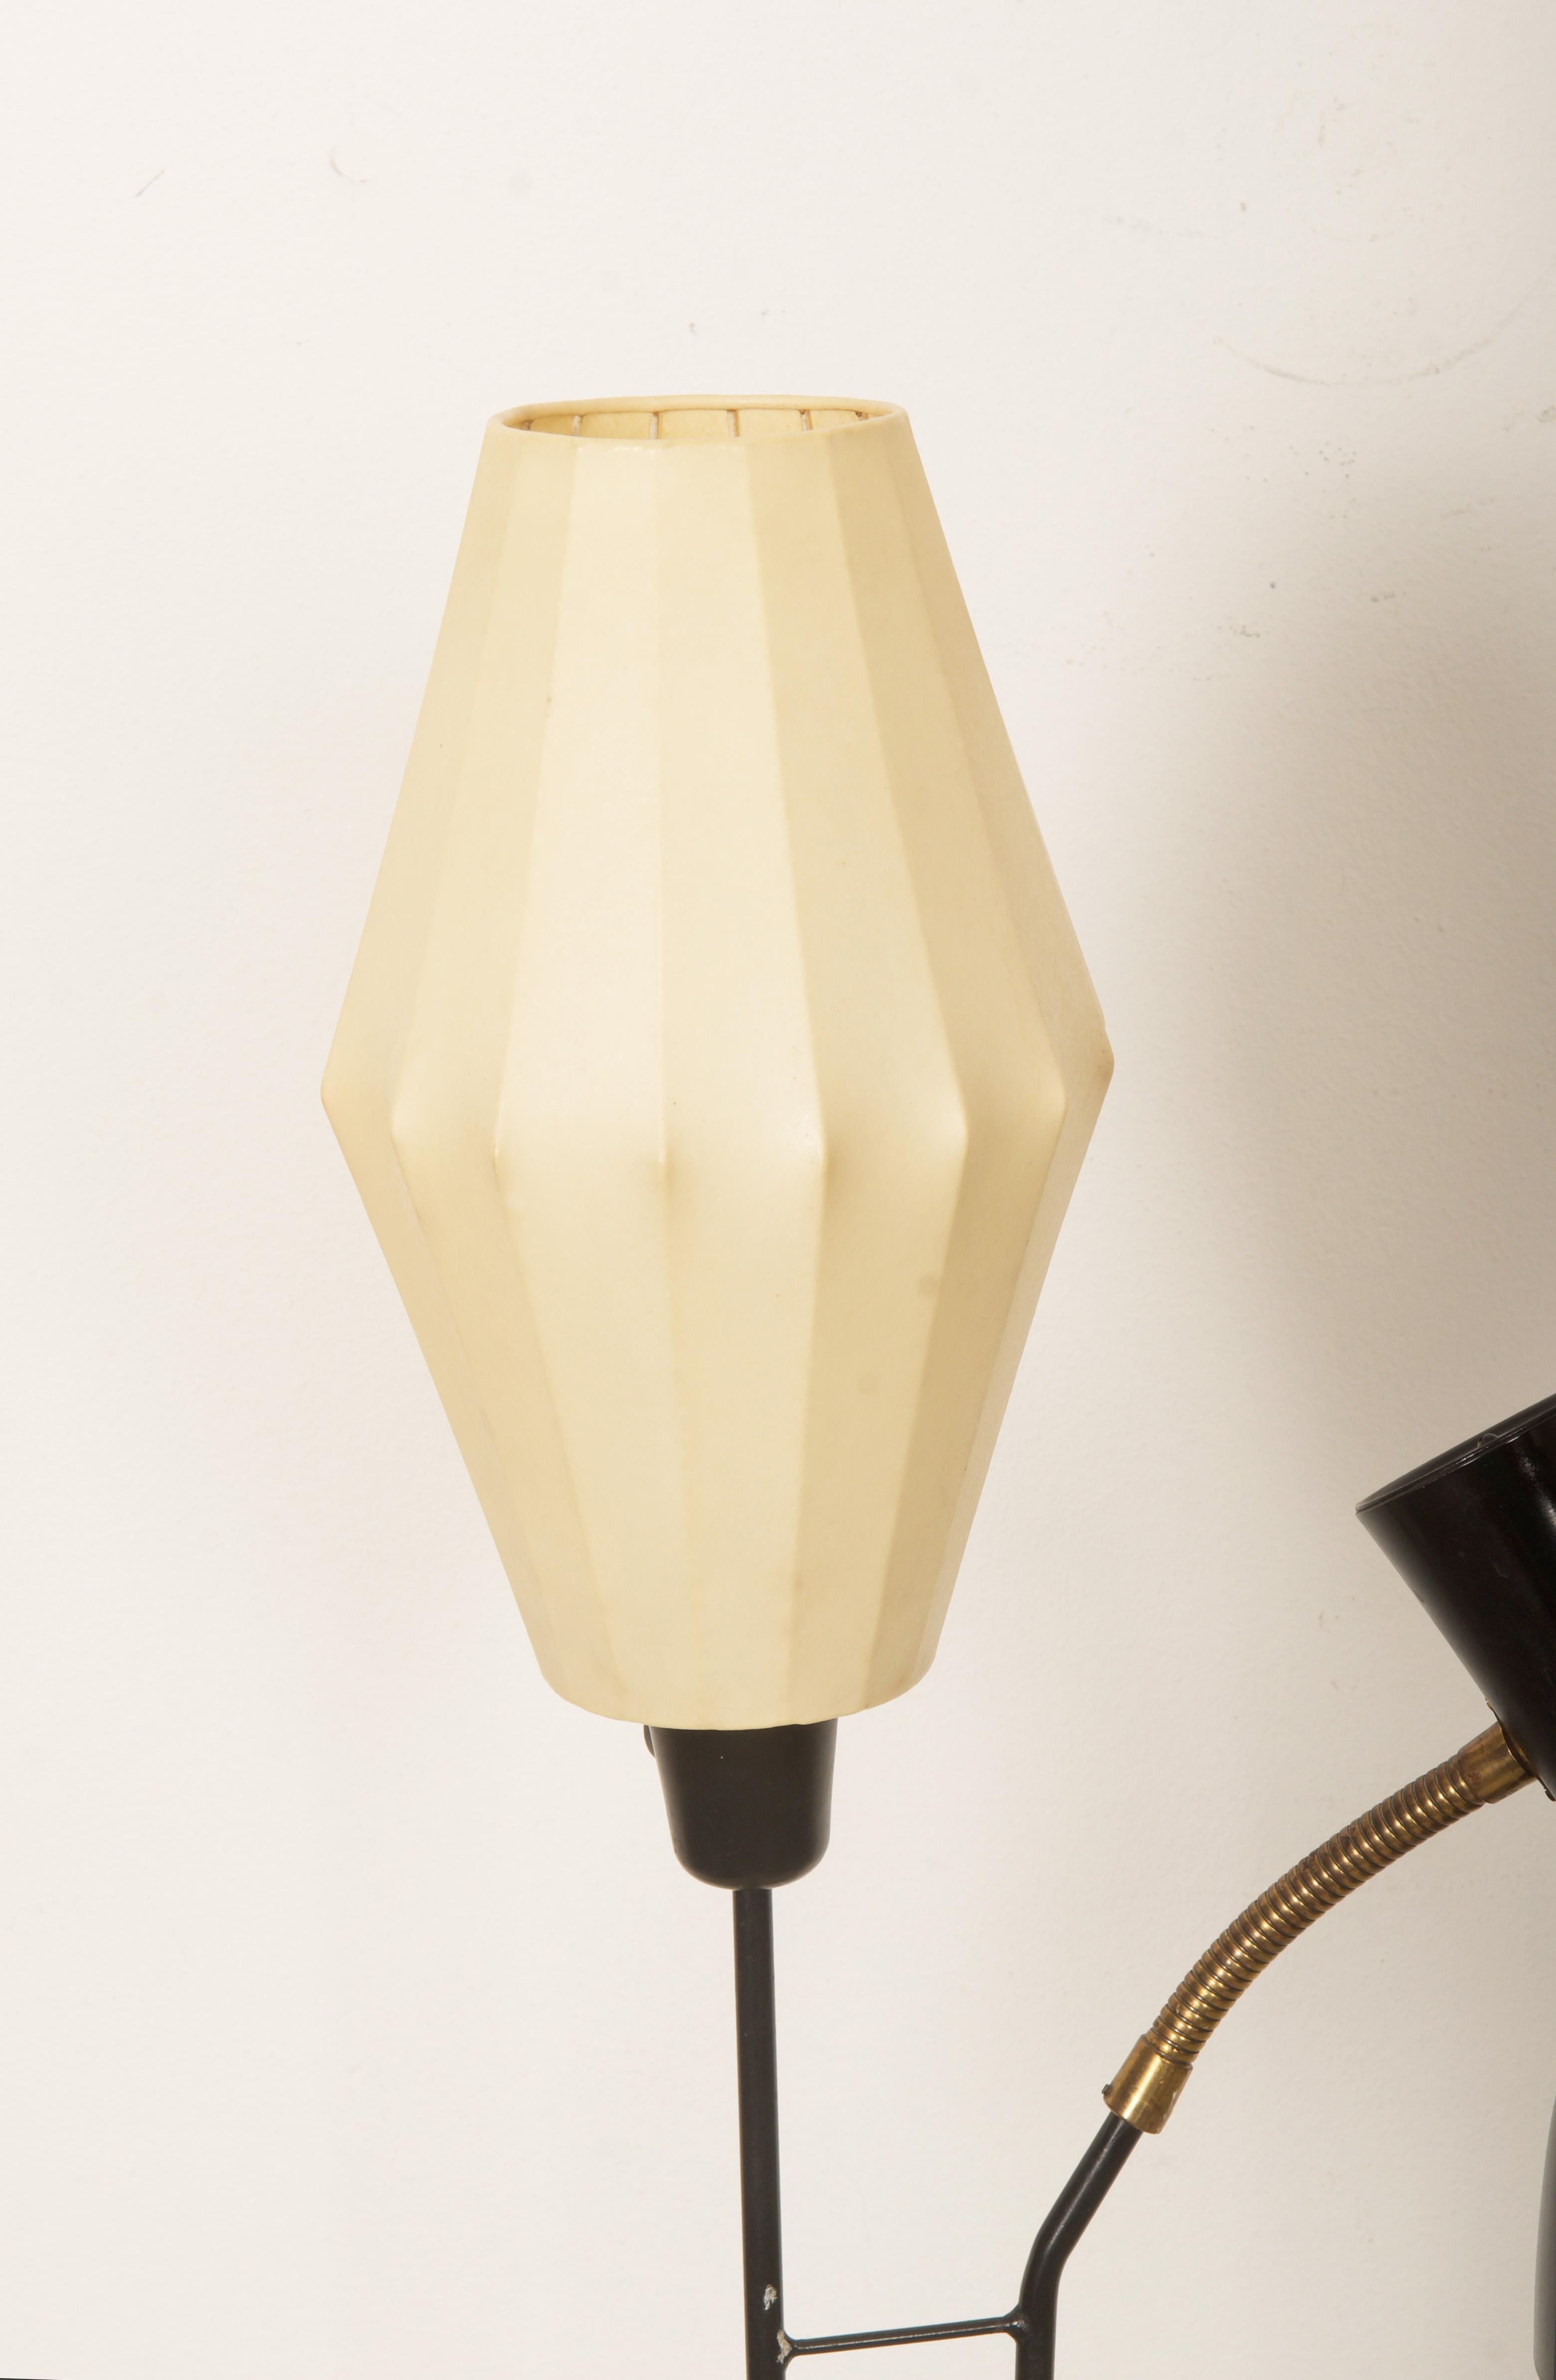 Painted Rare Floor Lamp by Hans Bergström for Ateljé Lyktan from the 1950s For Sale